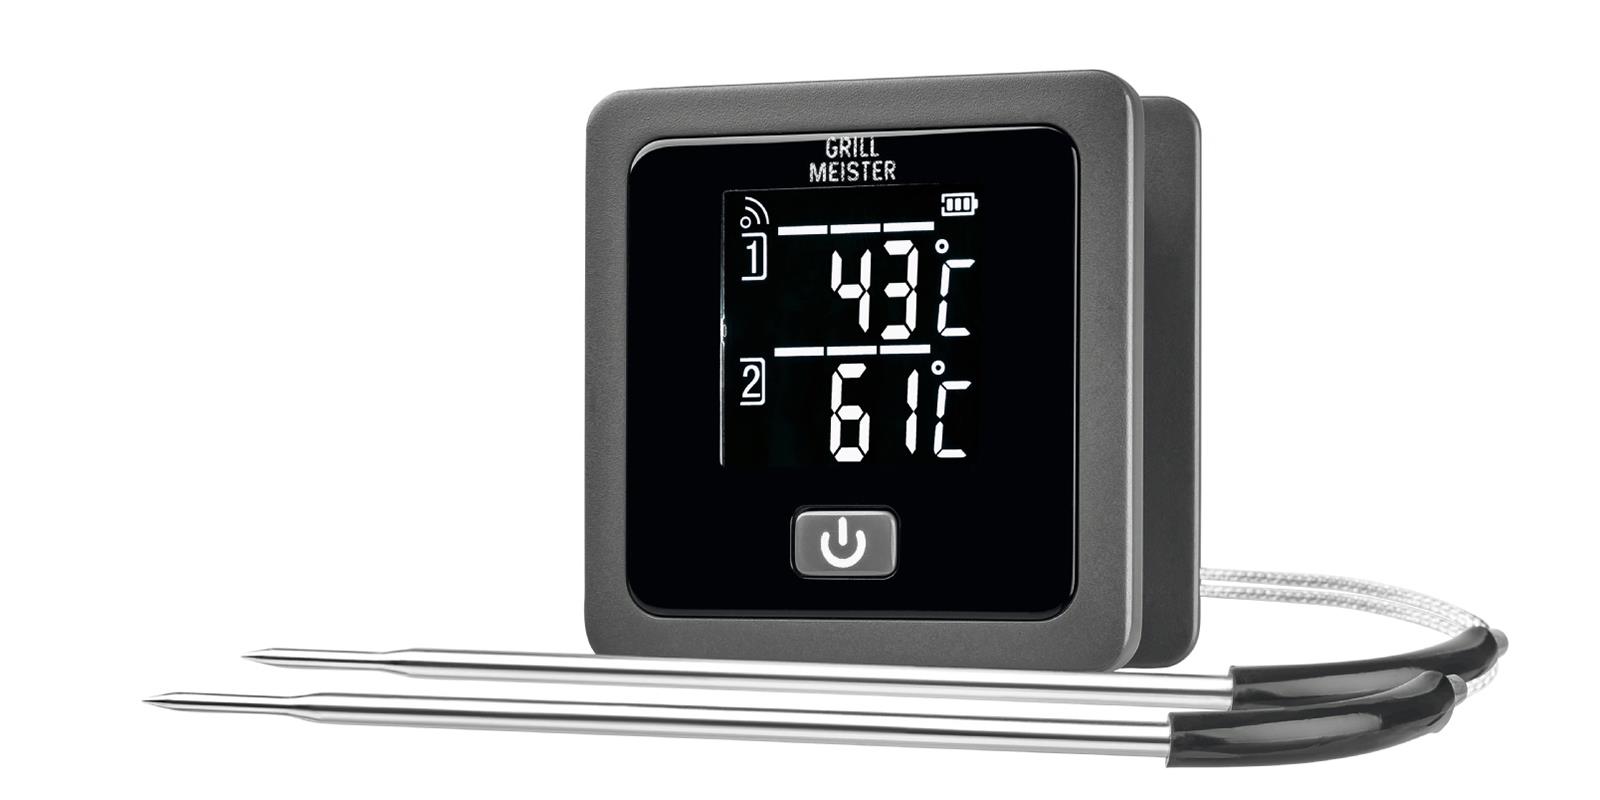 GRILLMEISTER funk-Grillthermometer 2.4 GTGT